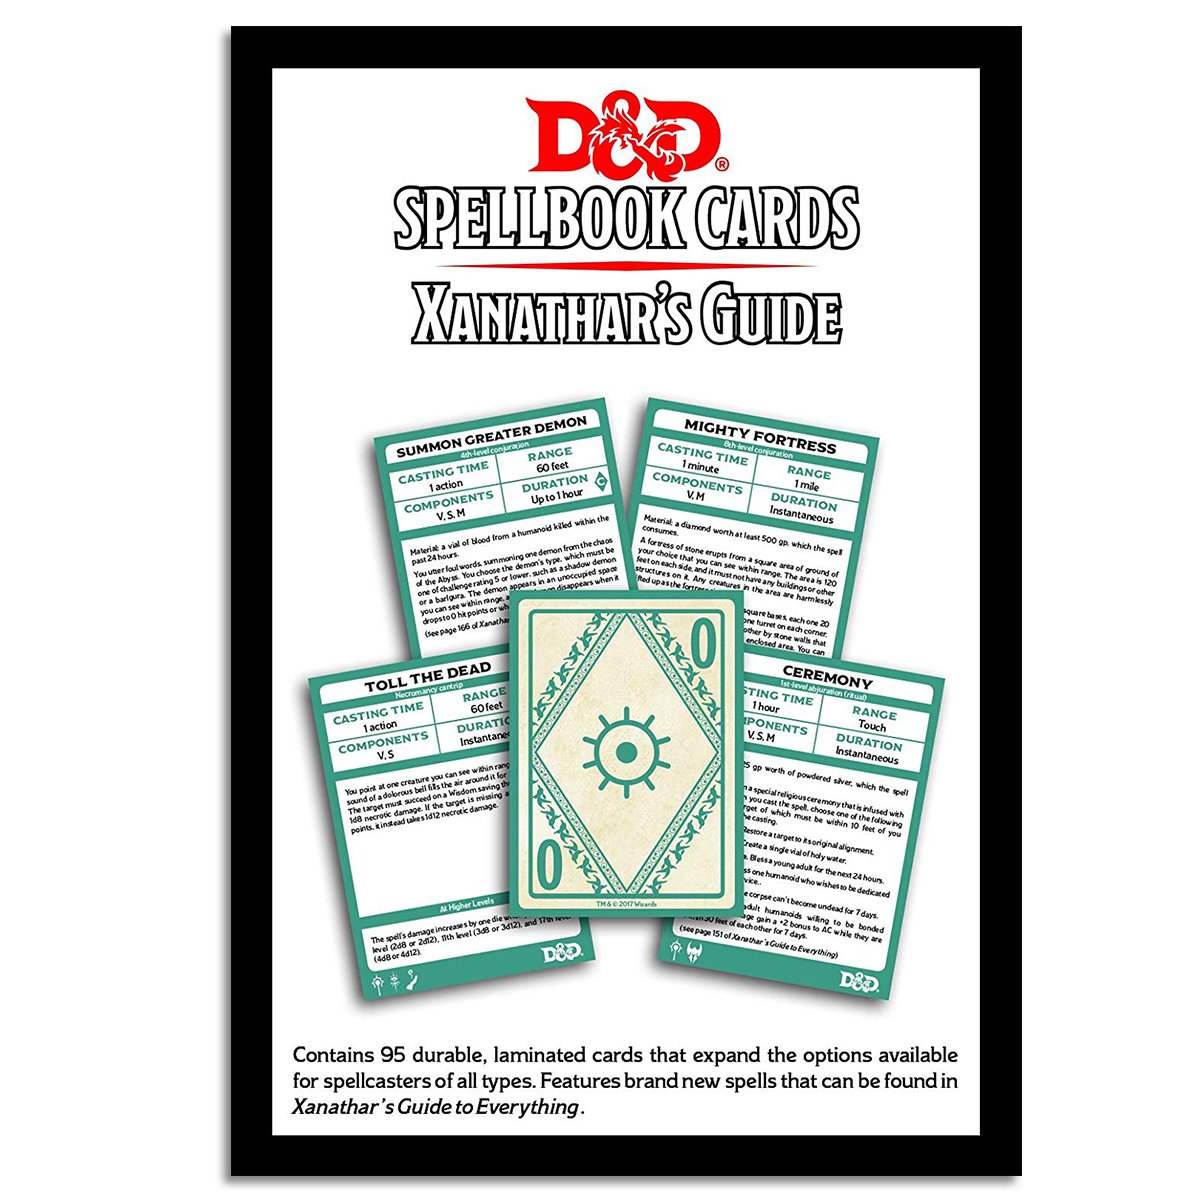 Dungeons &amp; Dragons Spellbook Cards - Xanathars Guide to Everything Deck